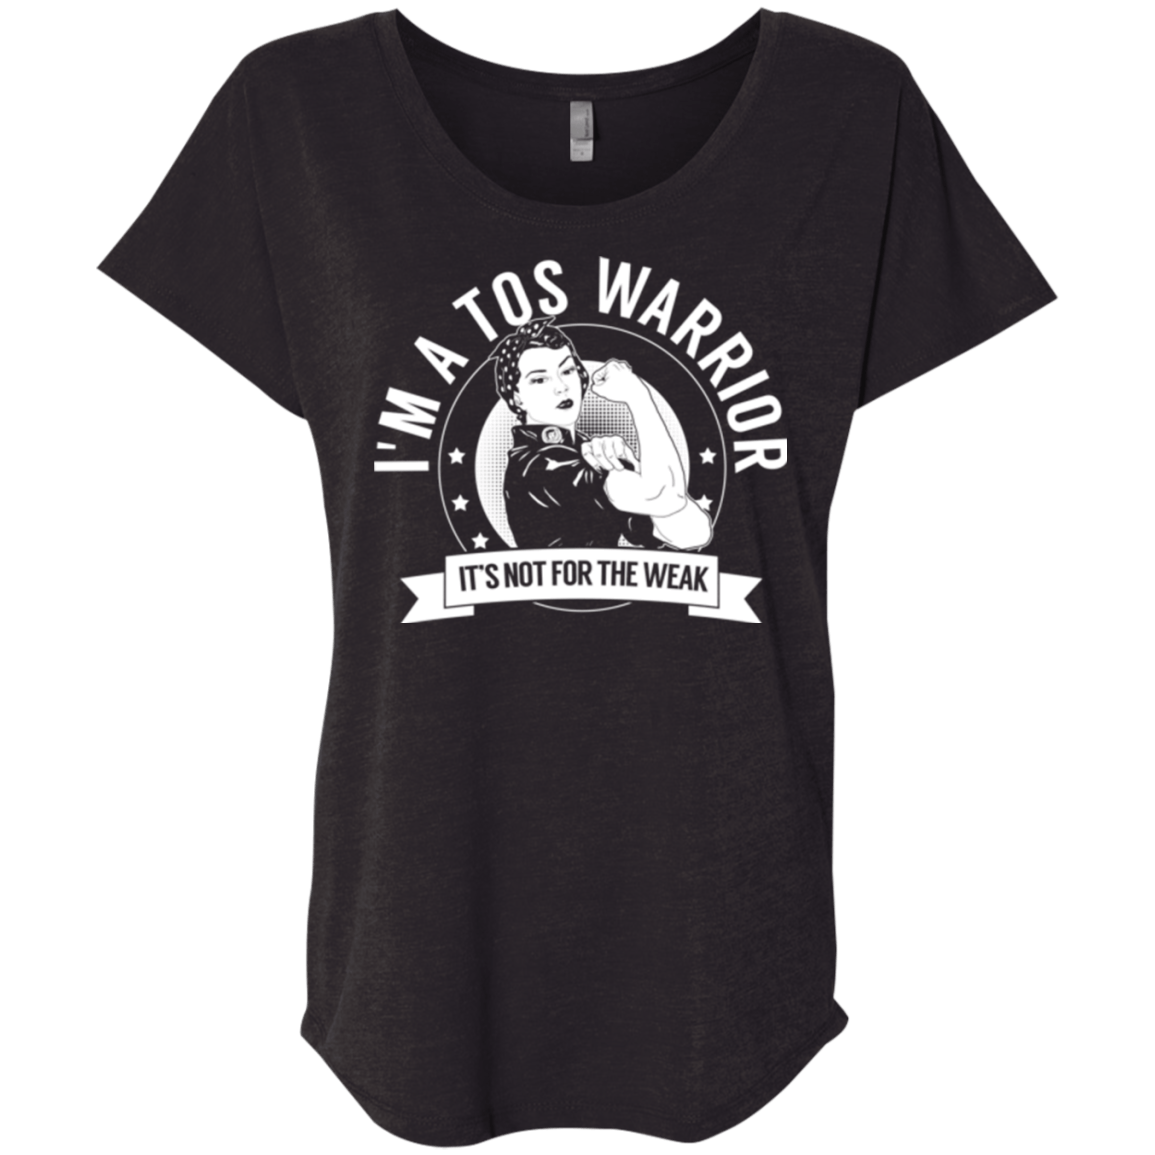 Thoracic Outlet Syndrome - TOS Warrior Not For The Weak Dolman Sleeve - The Unchargeables